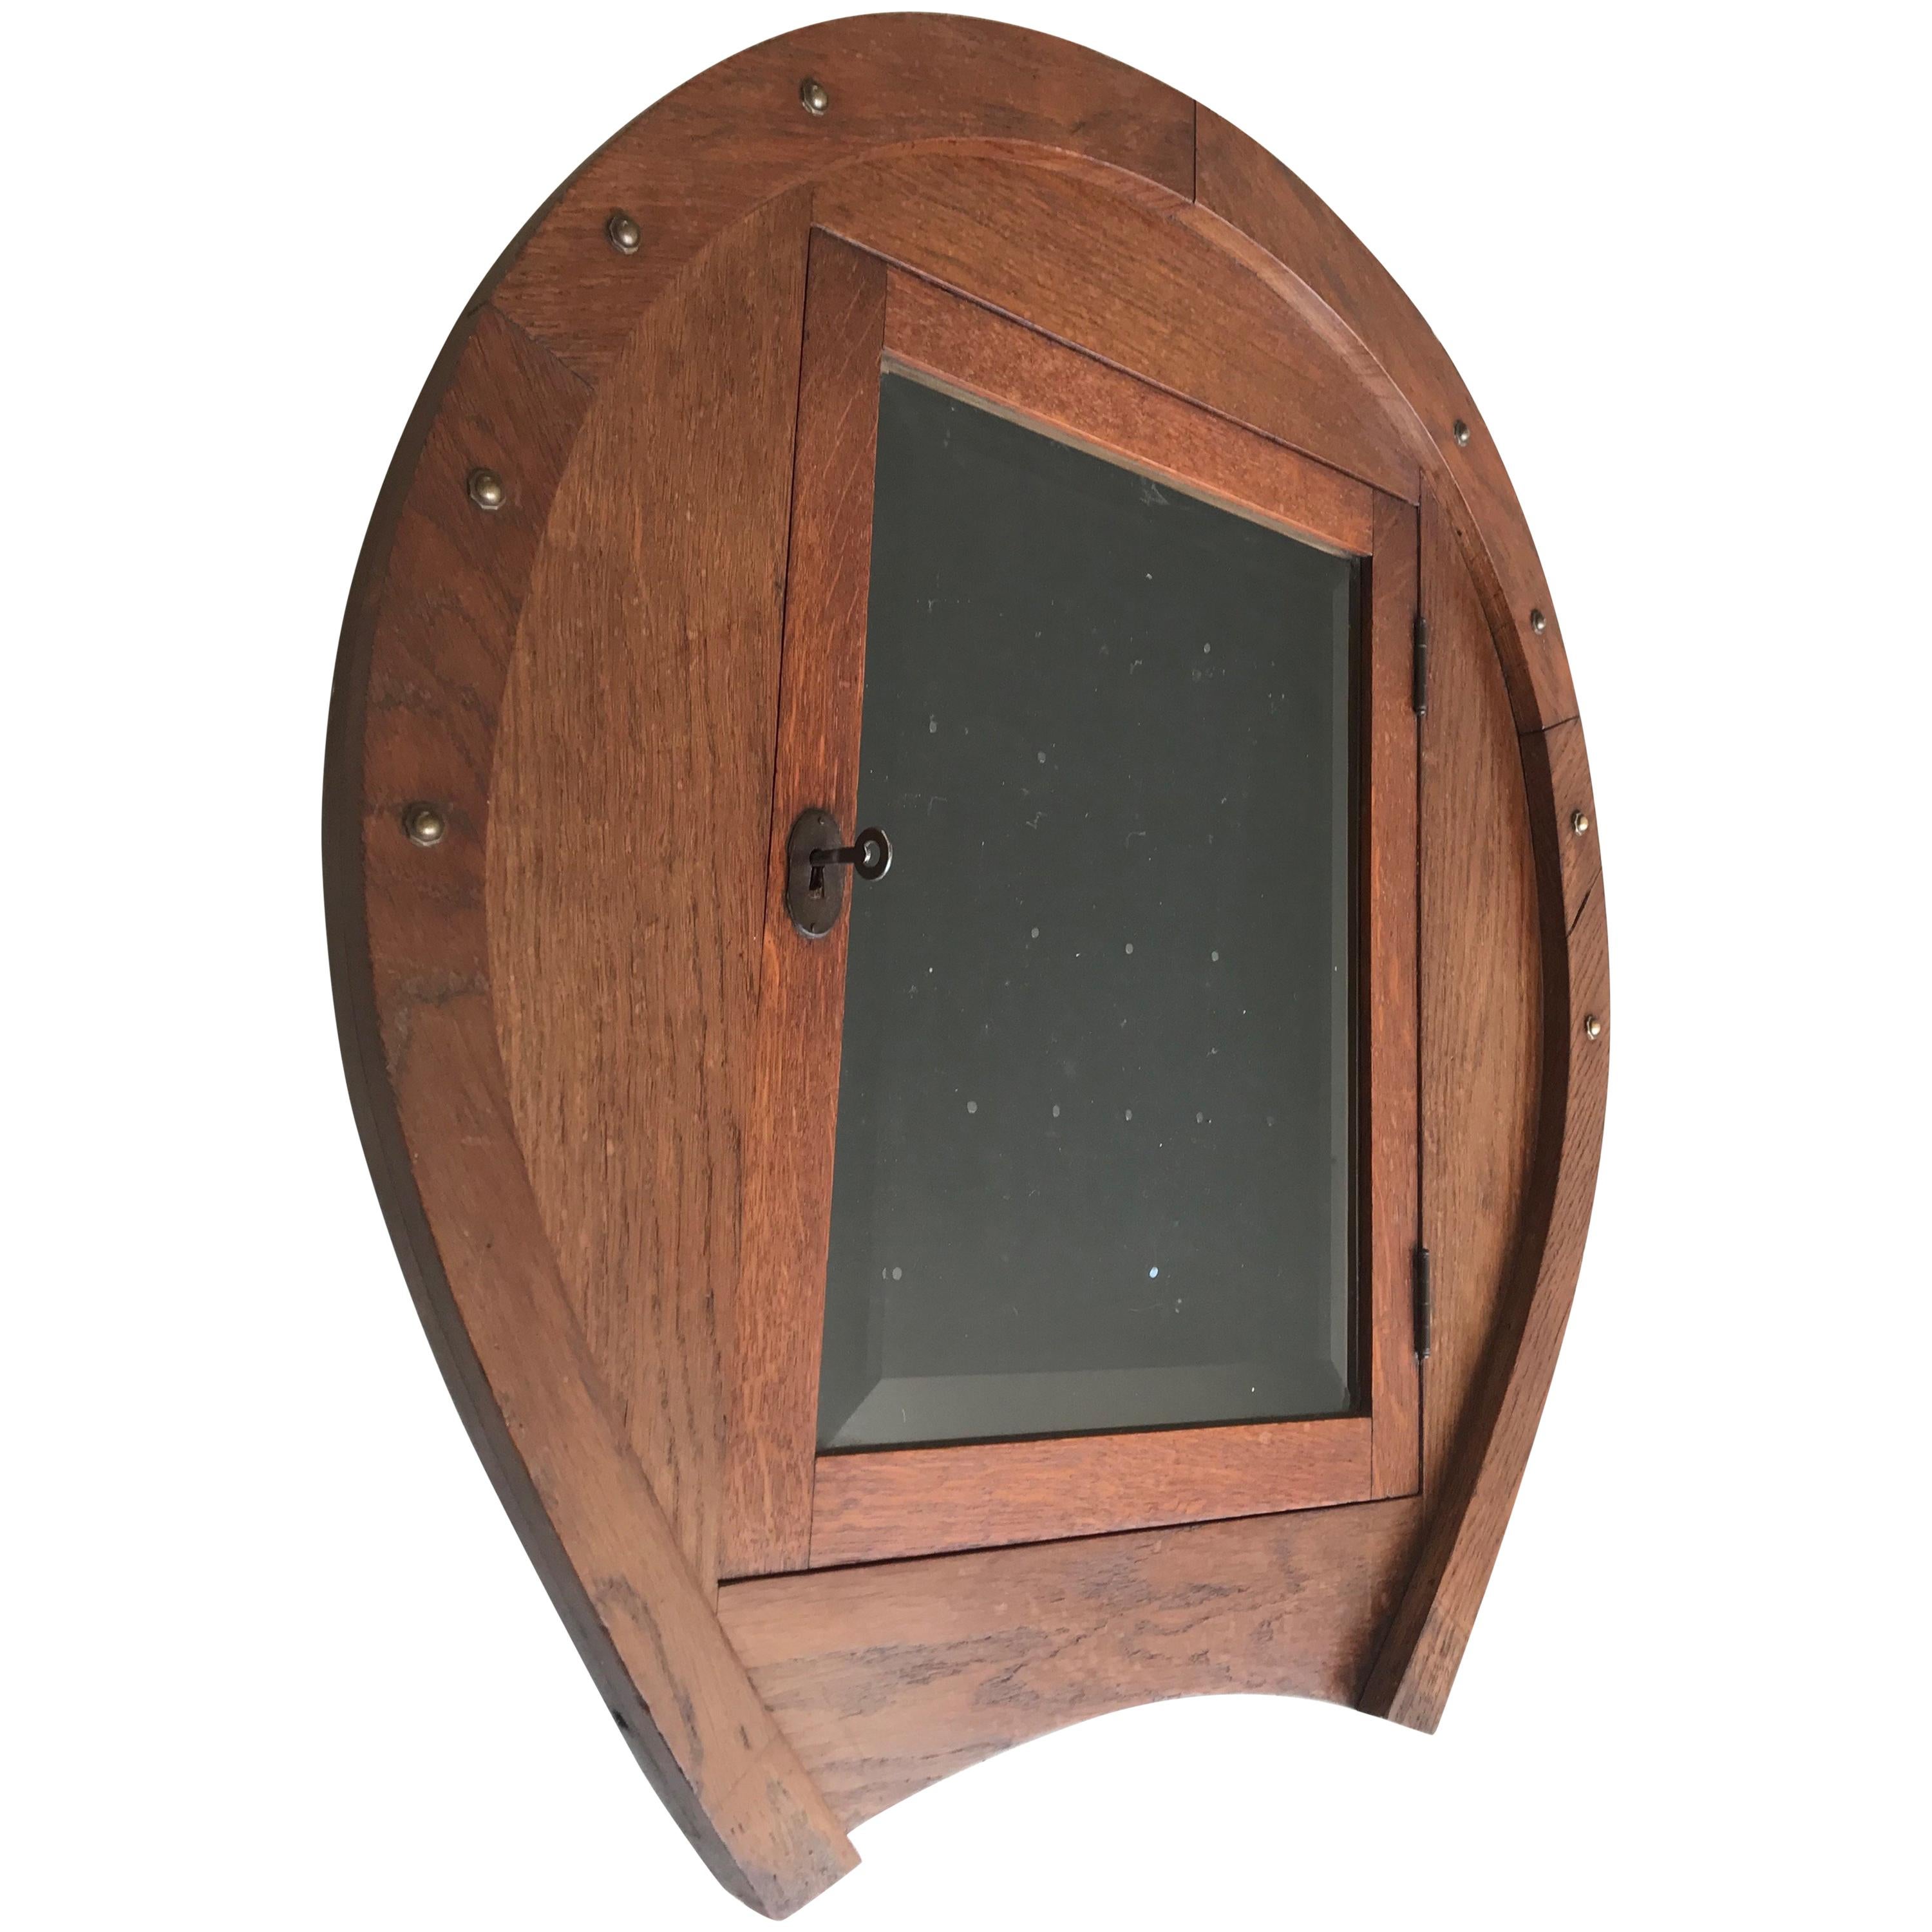 Unique Early 1900s Horse Shoe Shape Display Wall Cabinet with Beveled Glass Door For Sale